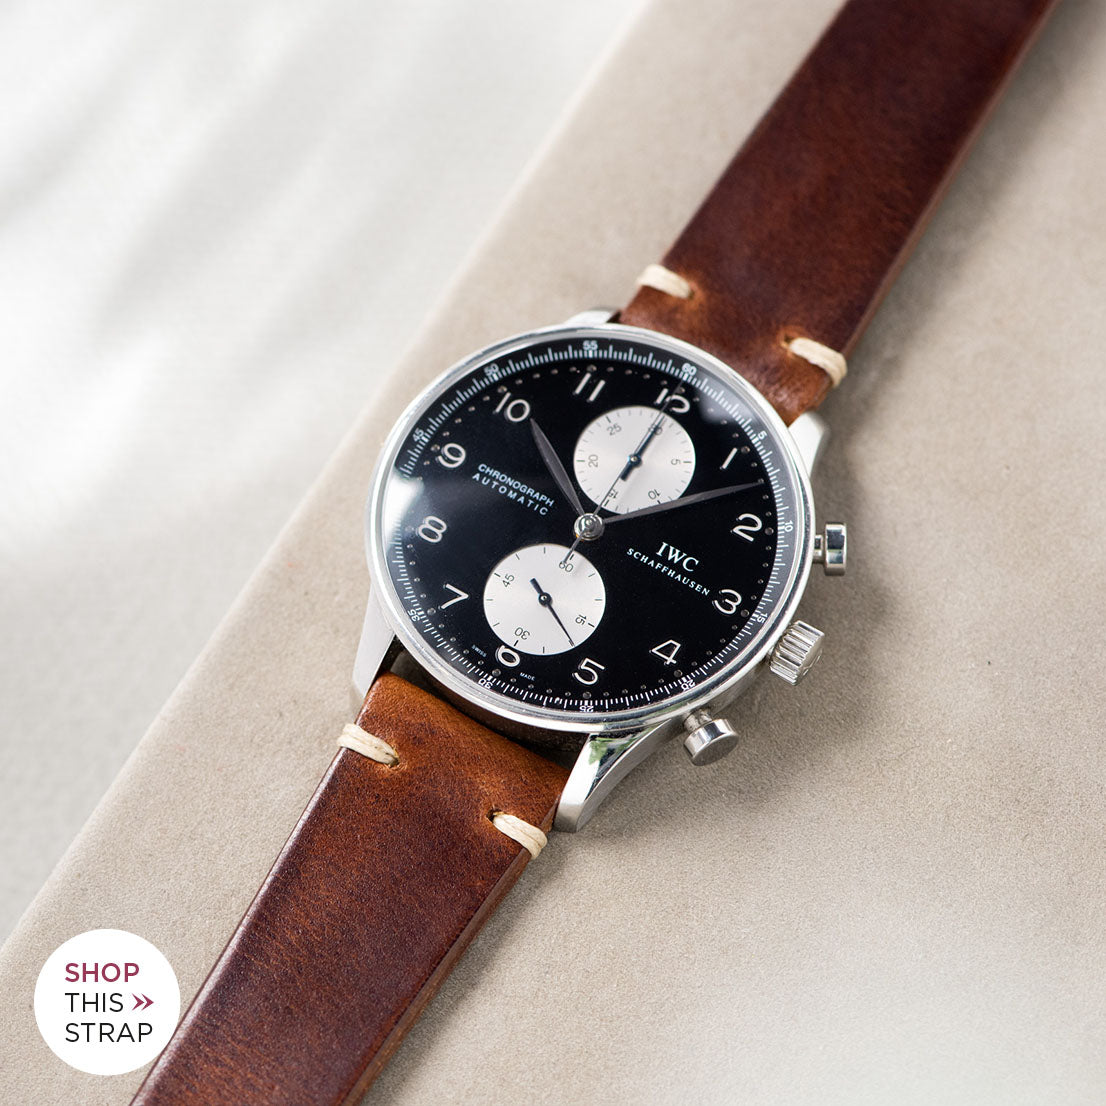 Bulang and Sons_Strap Guide_IWC-Portugieser_Siena Brown Leather Watch Strap